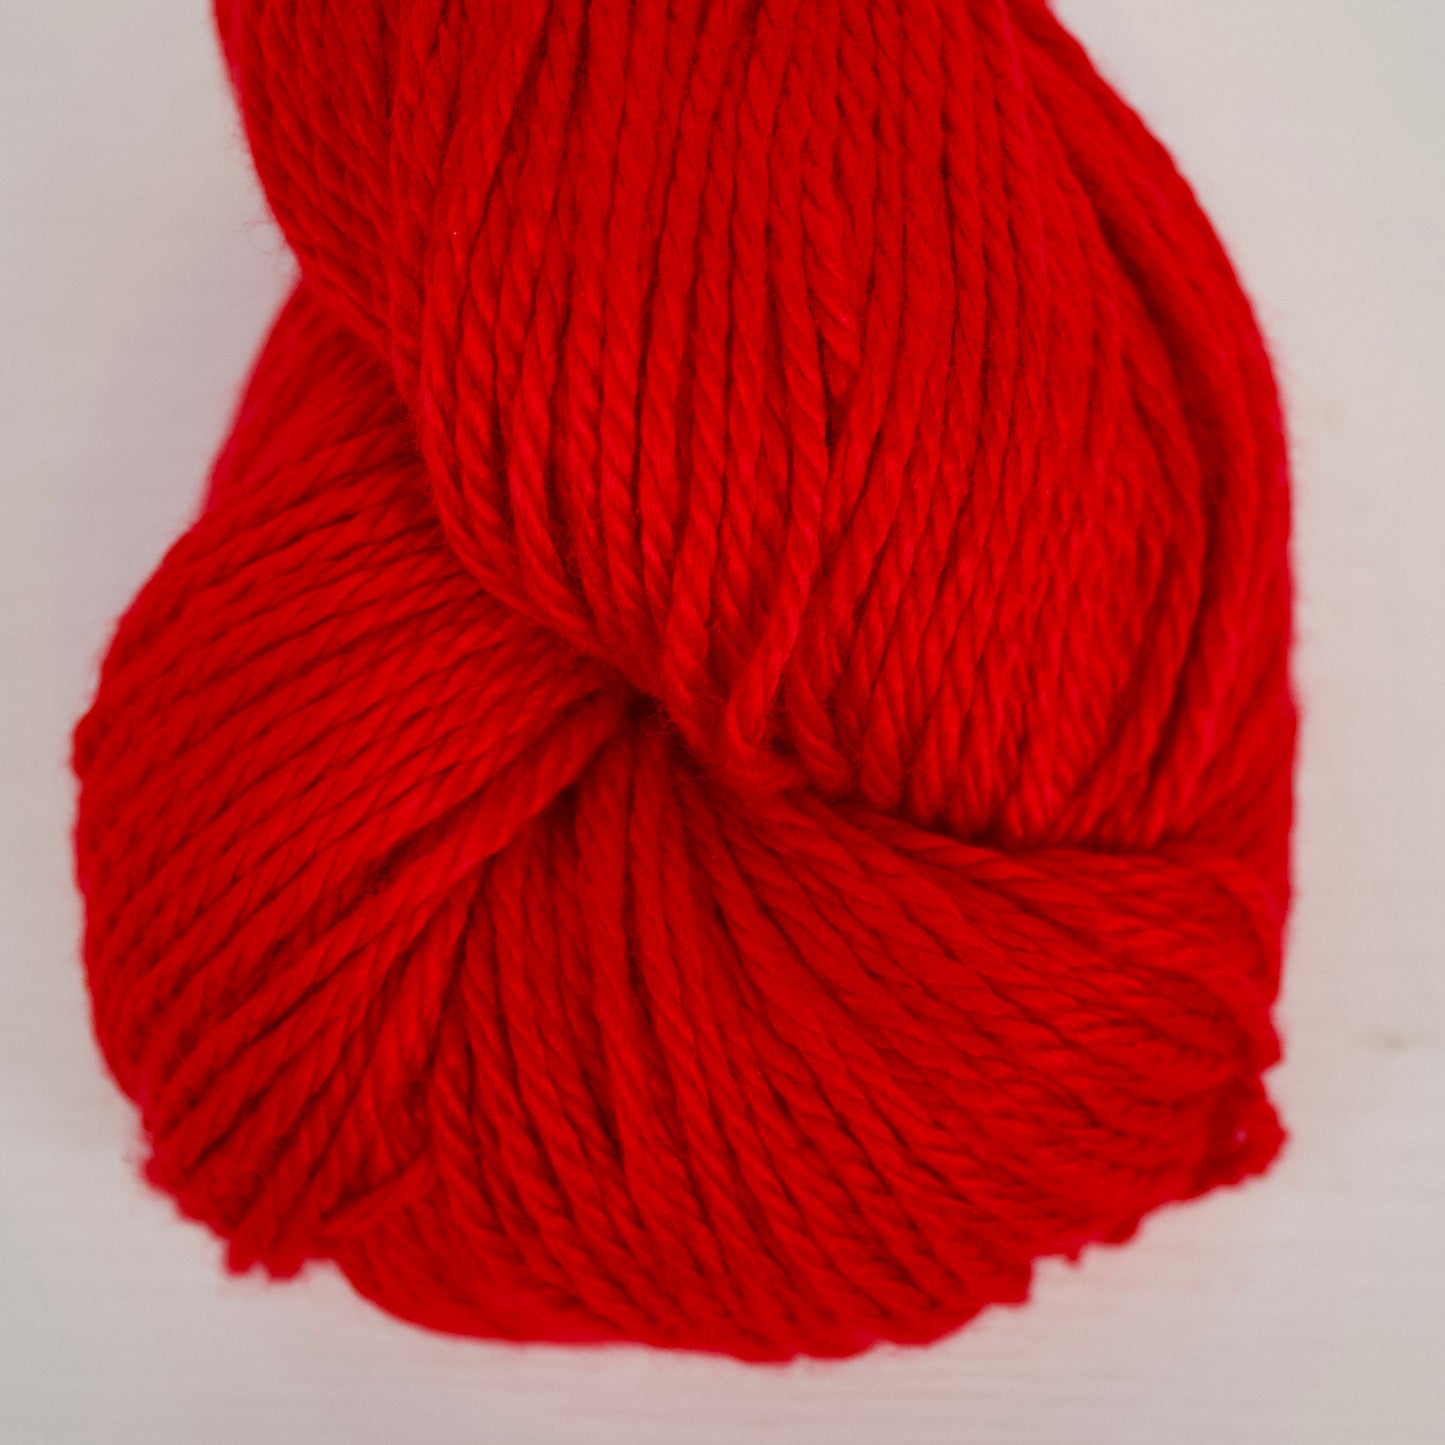 Vegan Yarn - Alnilam - Firecracker is an intense, classic red, only slightly semisolid for some visual texture.